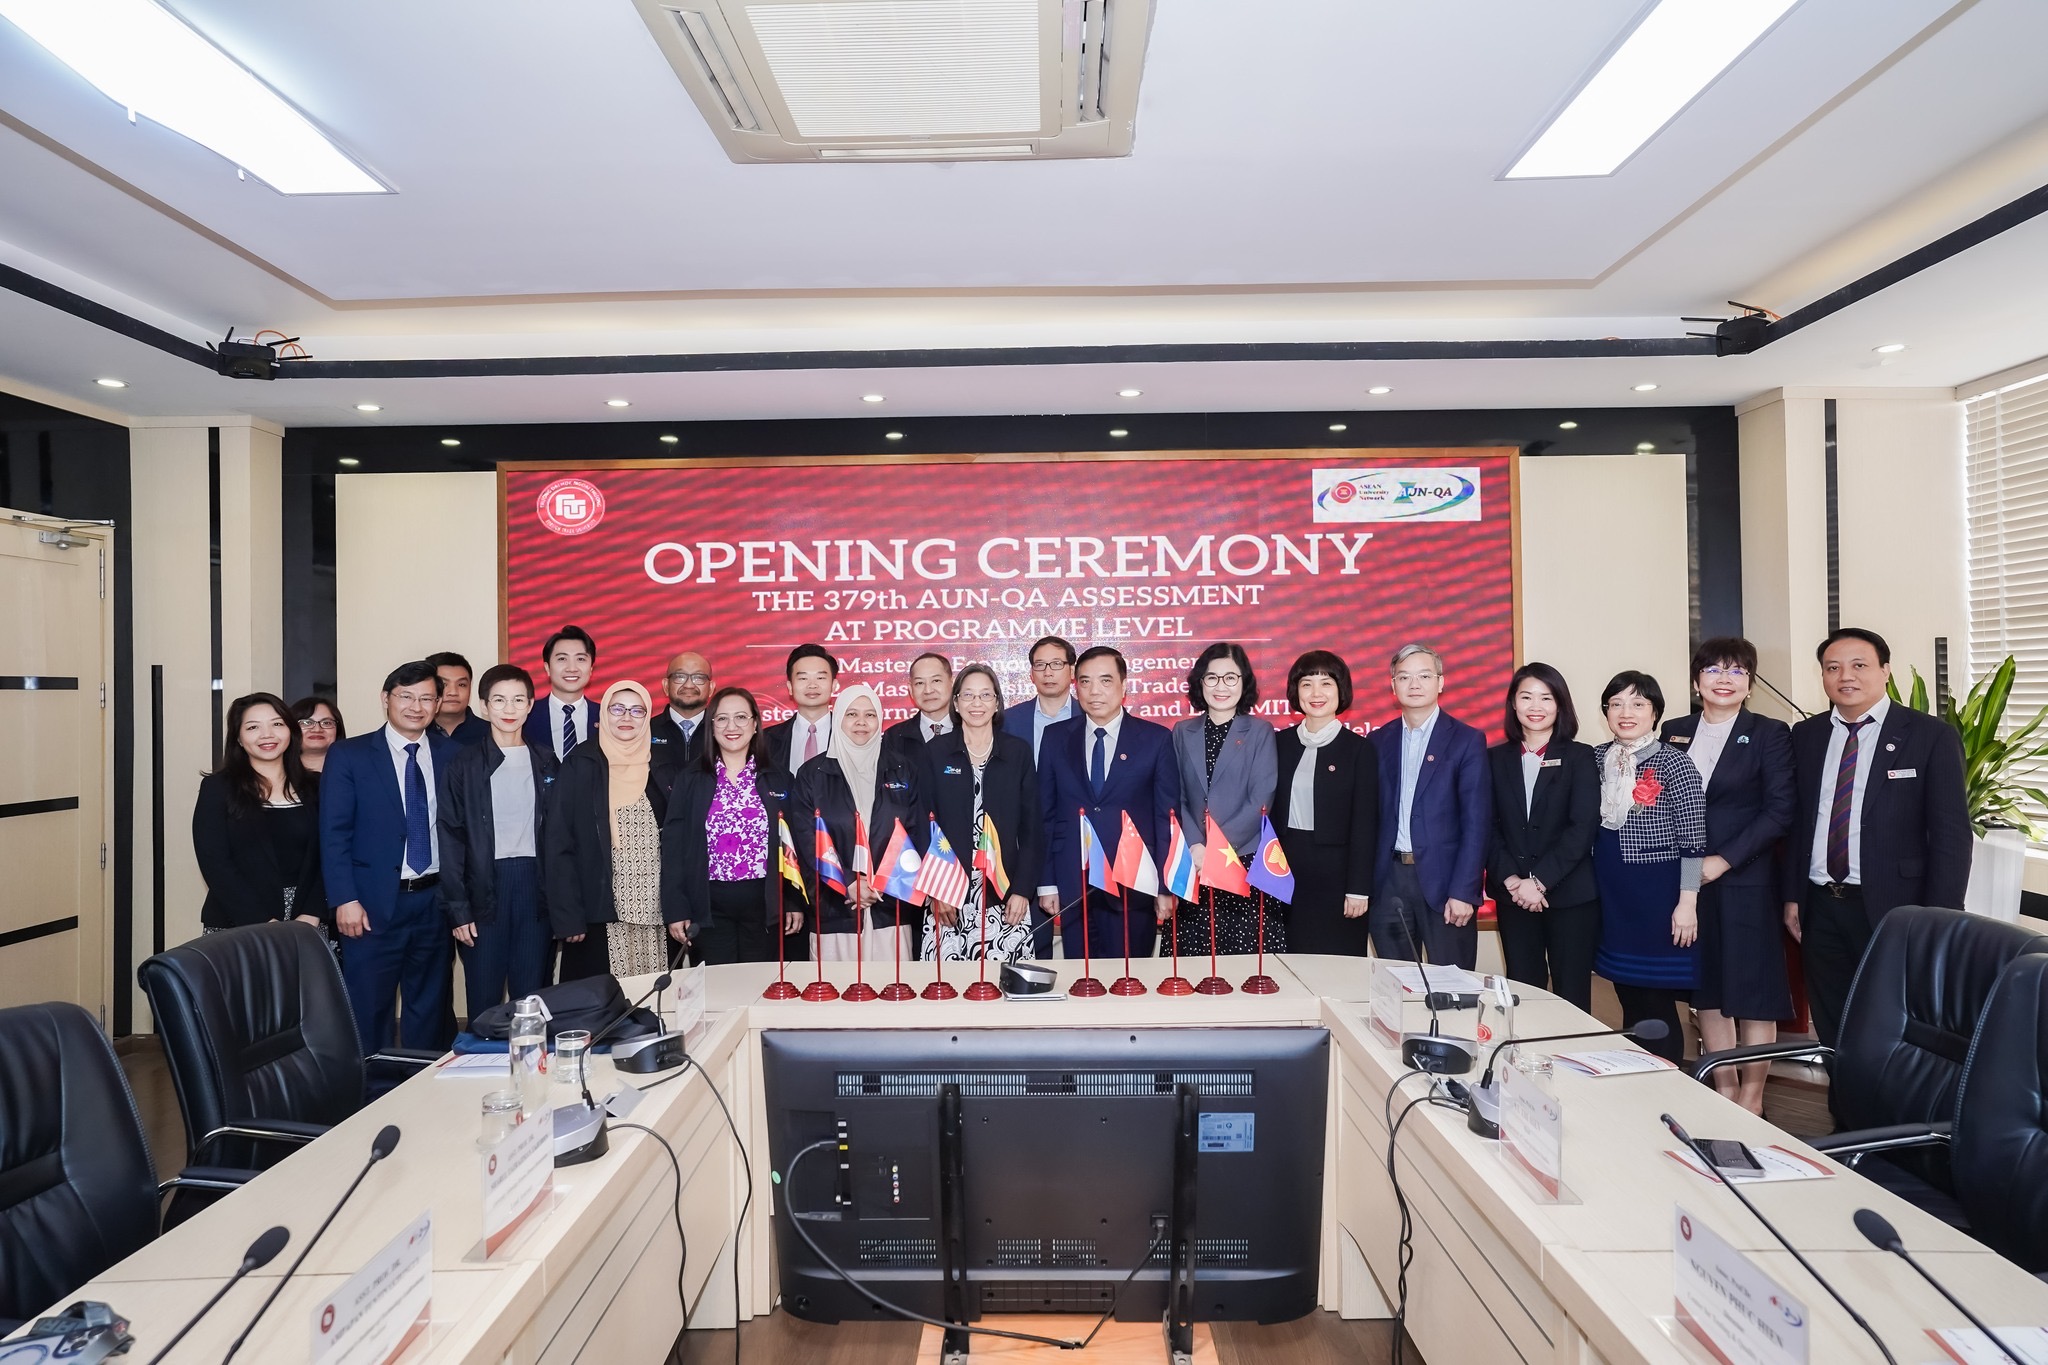 Associate Professor Dr. Dhiyathad Prateeppornnarong took part in the 379th AUN-QA assessment at programme level assessing the Master of Economic Management (MaEM), School of Economic and International Business, Foreign Trade University in Hanoi, Vietnam between 12-14 March 2024.